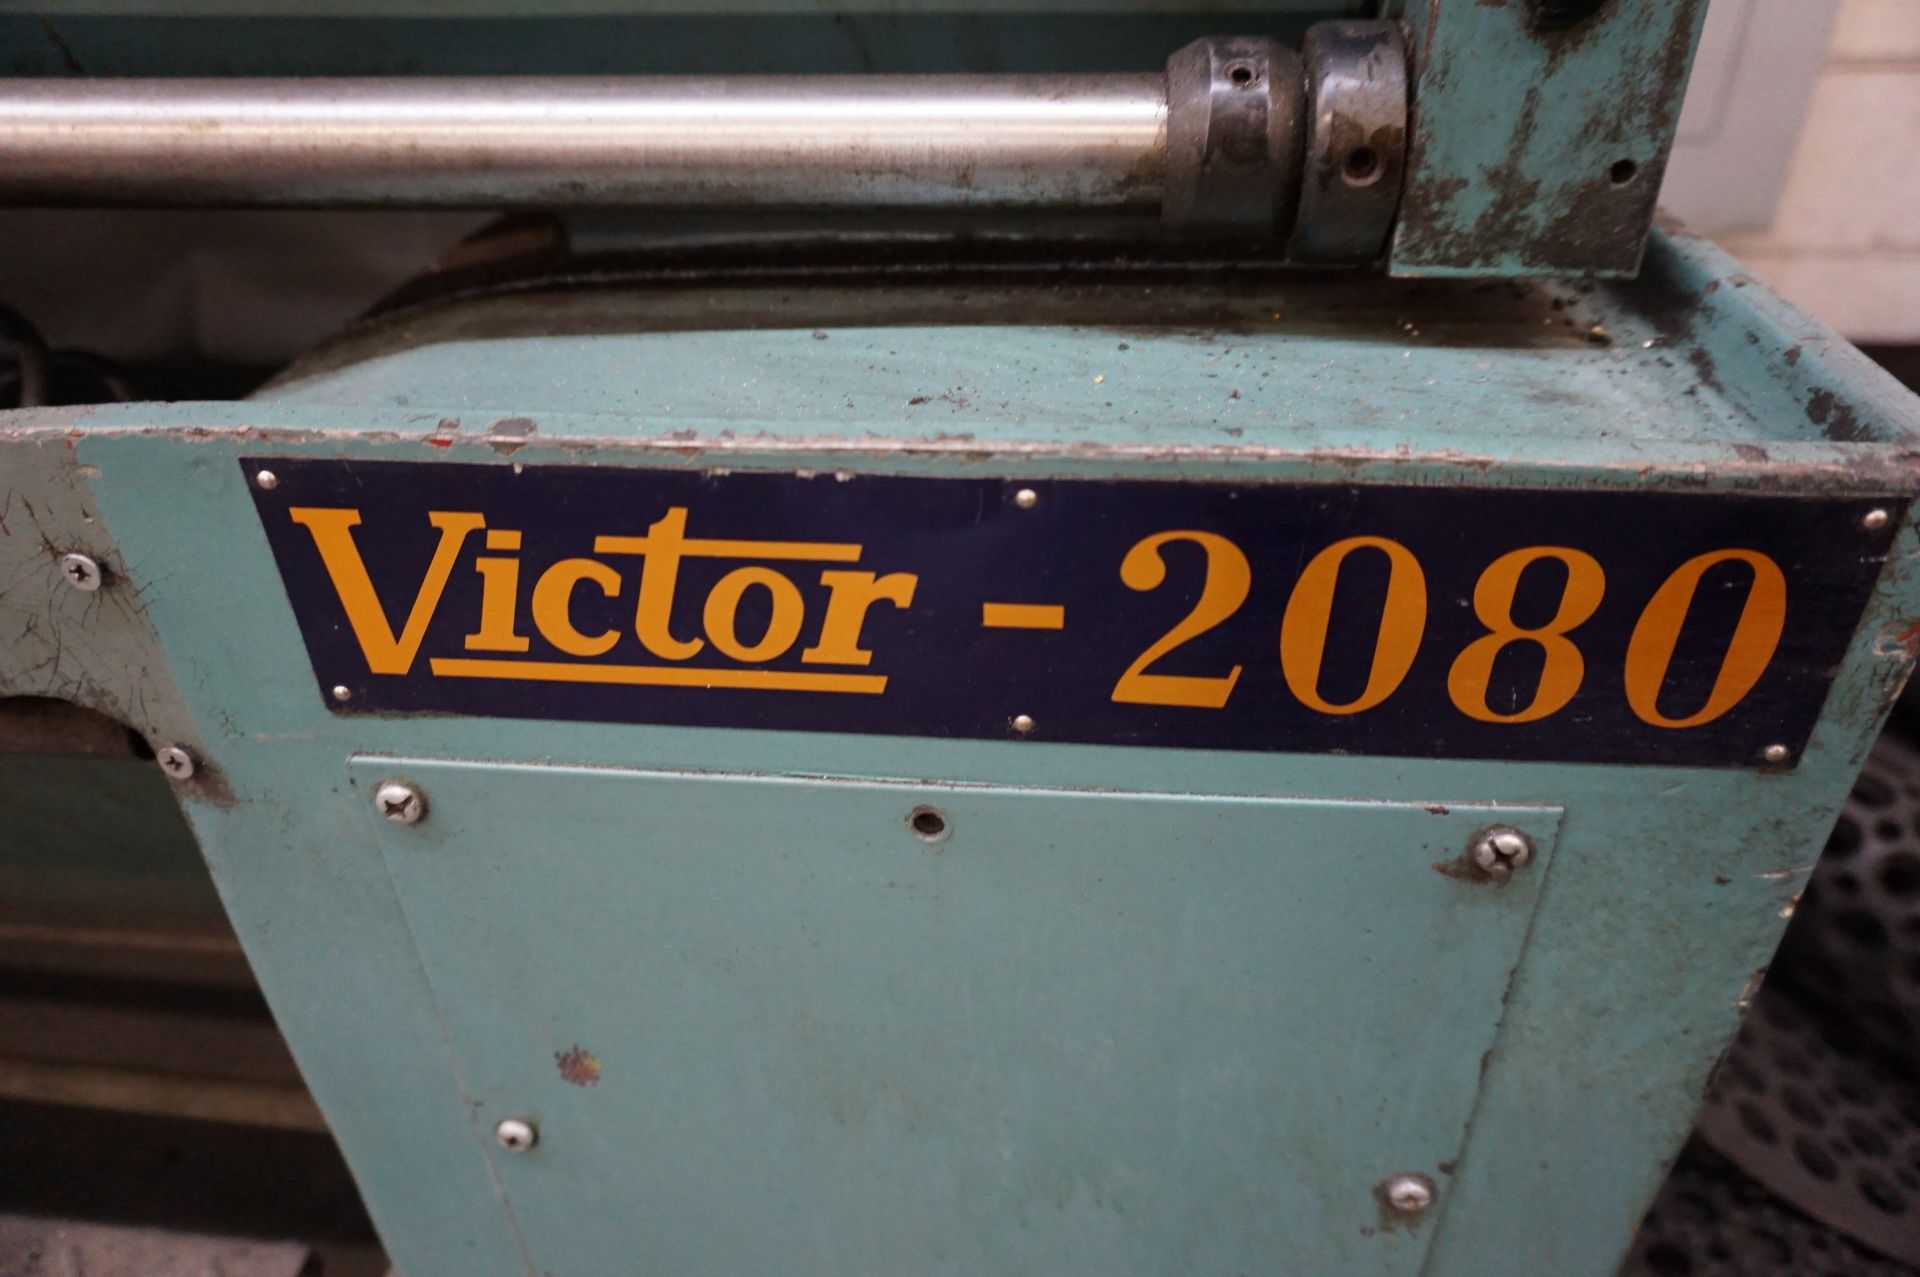 VICTOR 2080 ENGINE LATHE, S/N 710344, 10 HP, 220 V, CYCLES 60, 3 PHASE, CART WITH MANUALS, CHUCKS, - Image 6 of 10